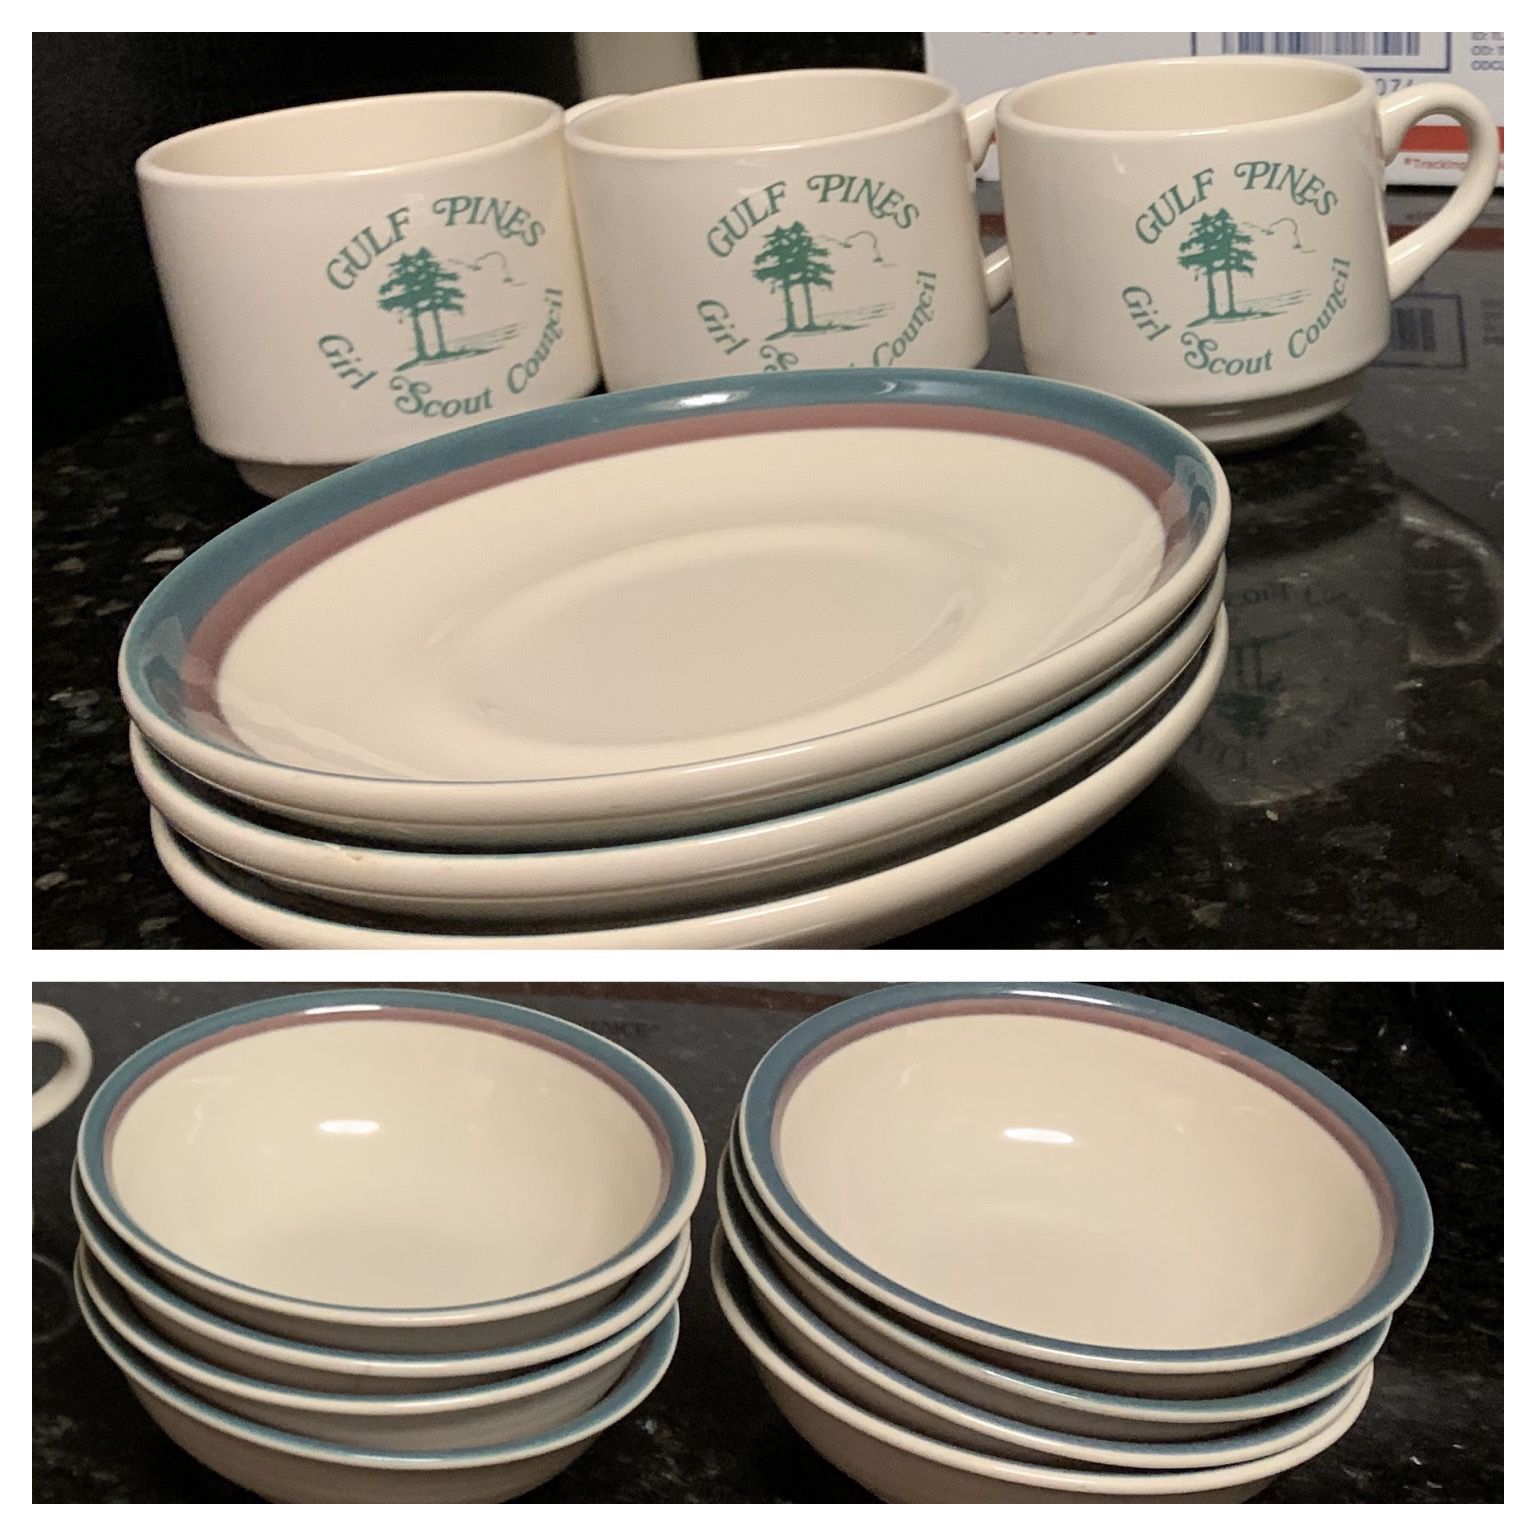 Lot of 3 Mugs, 3 Saucers, and 8 Bowls